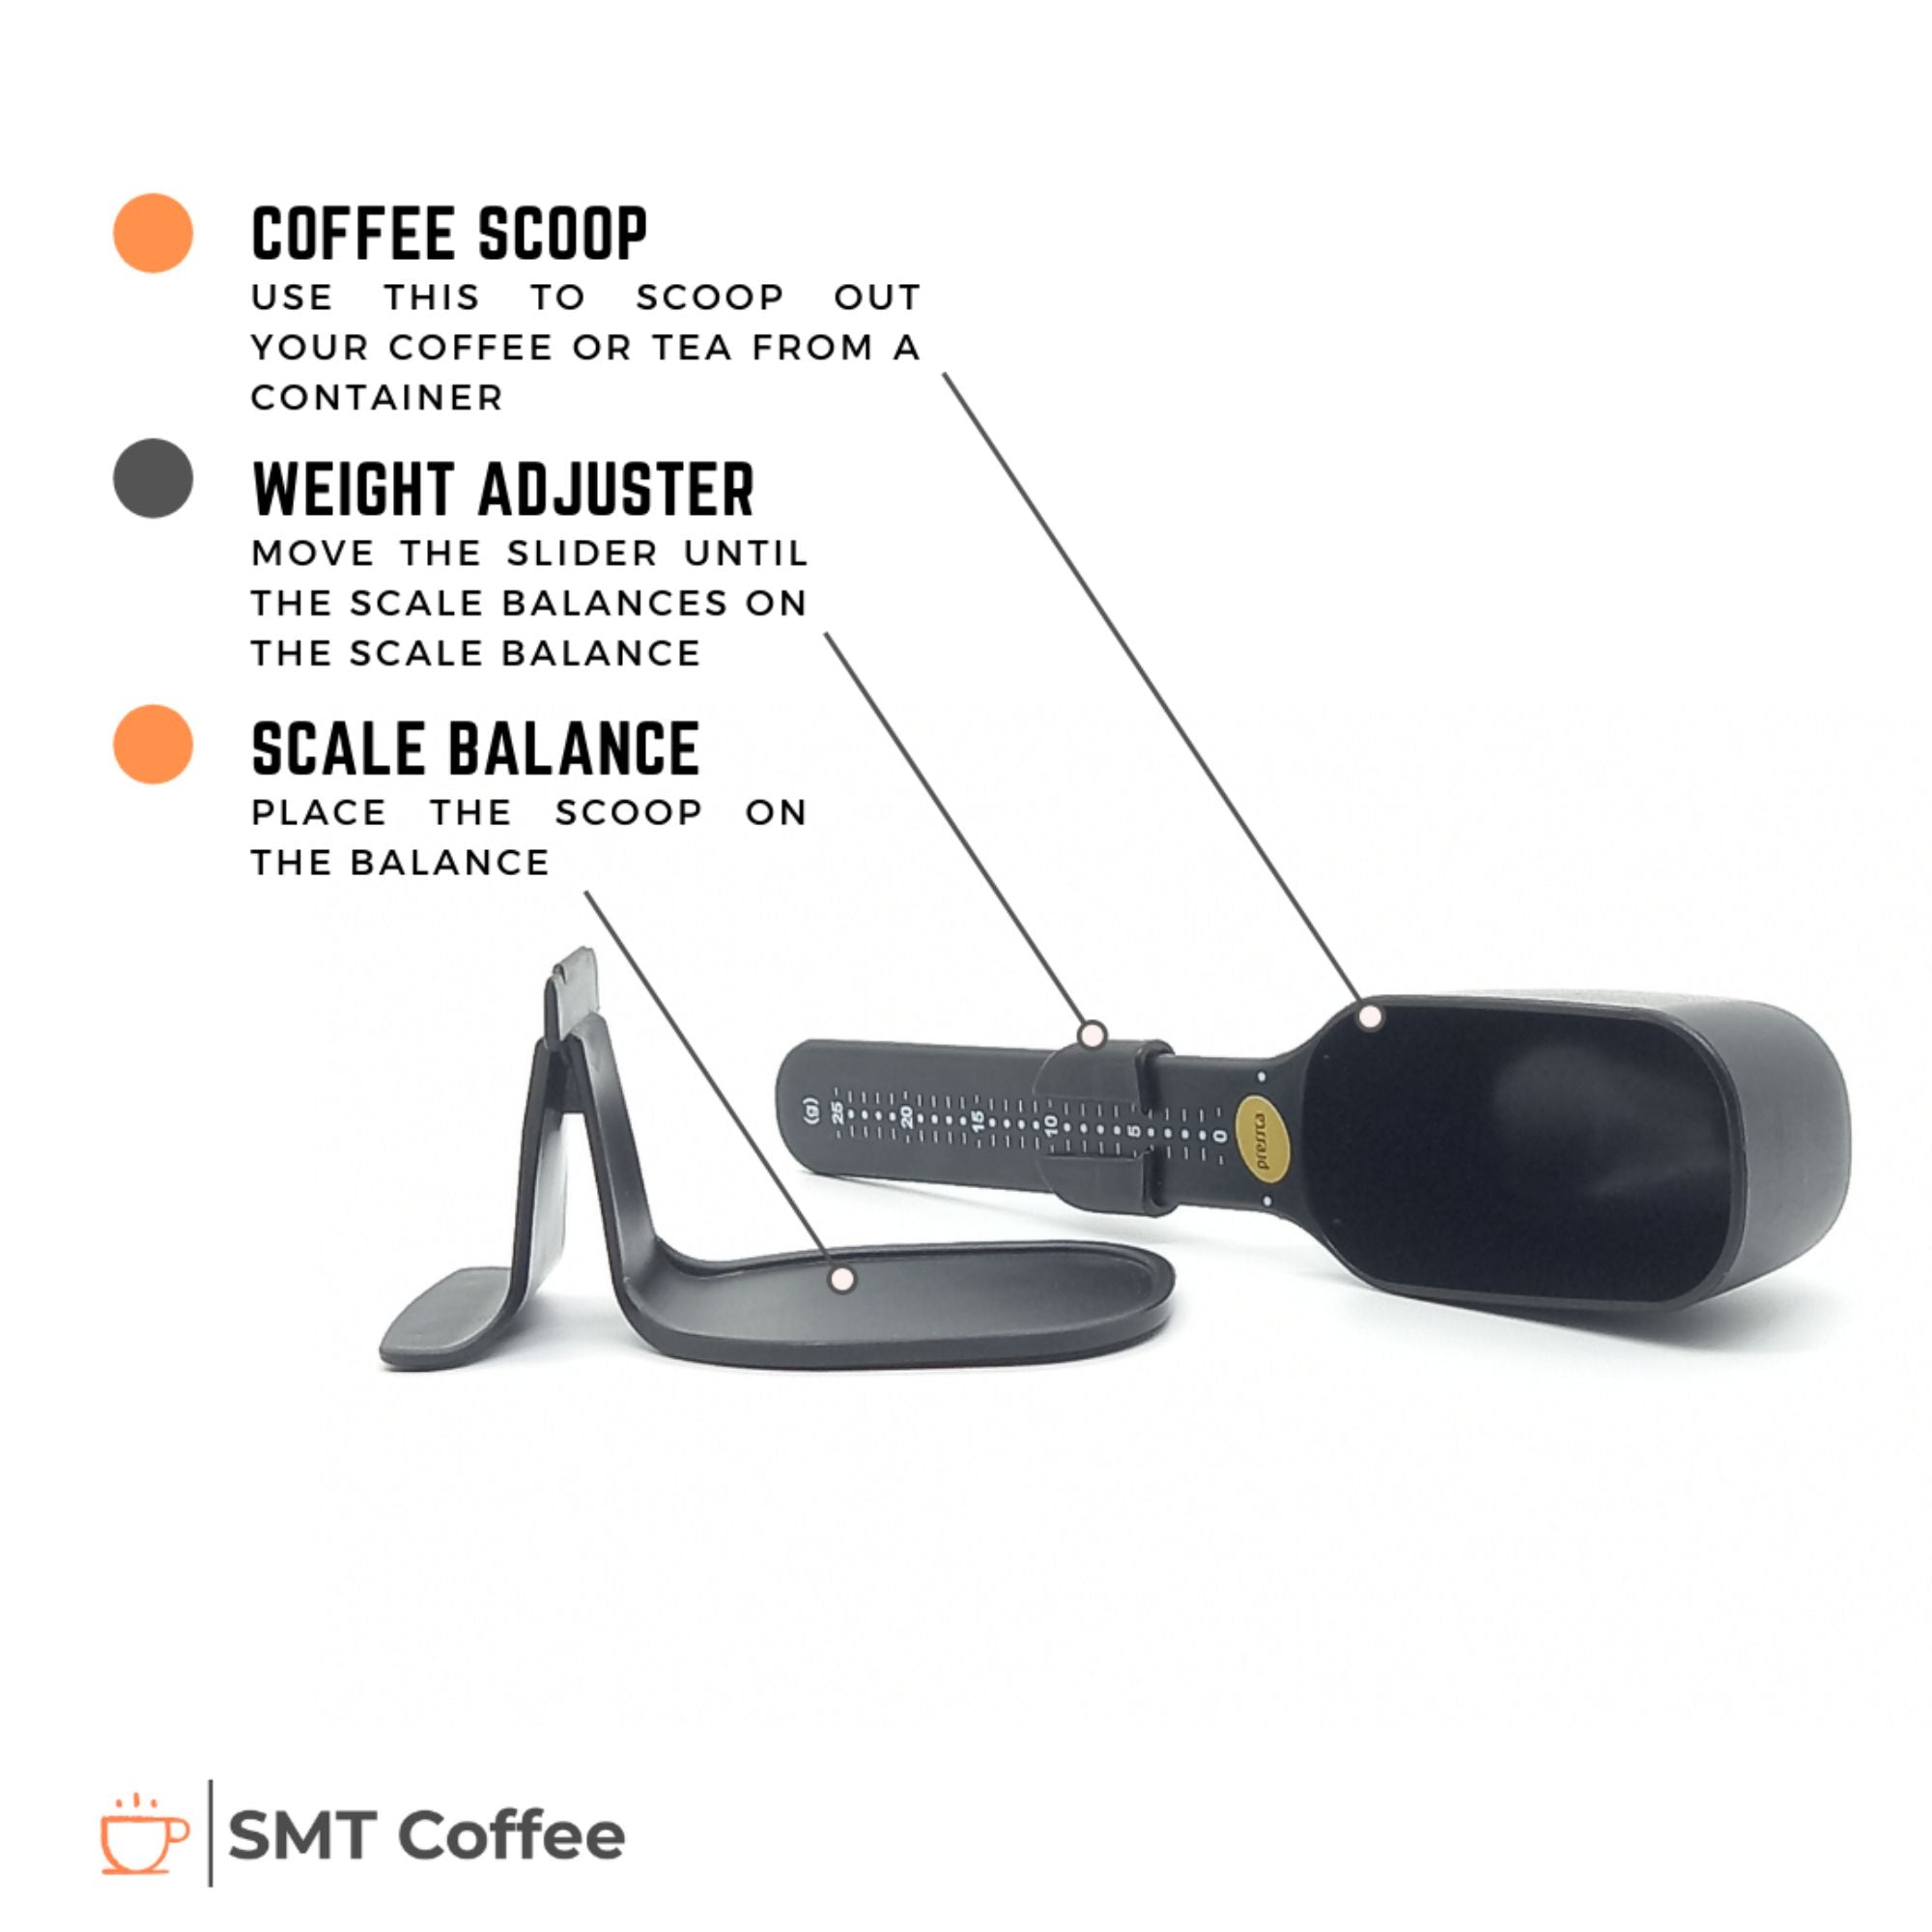 how to use smtcoffee coffee scoop and scale